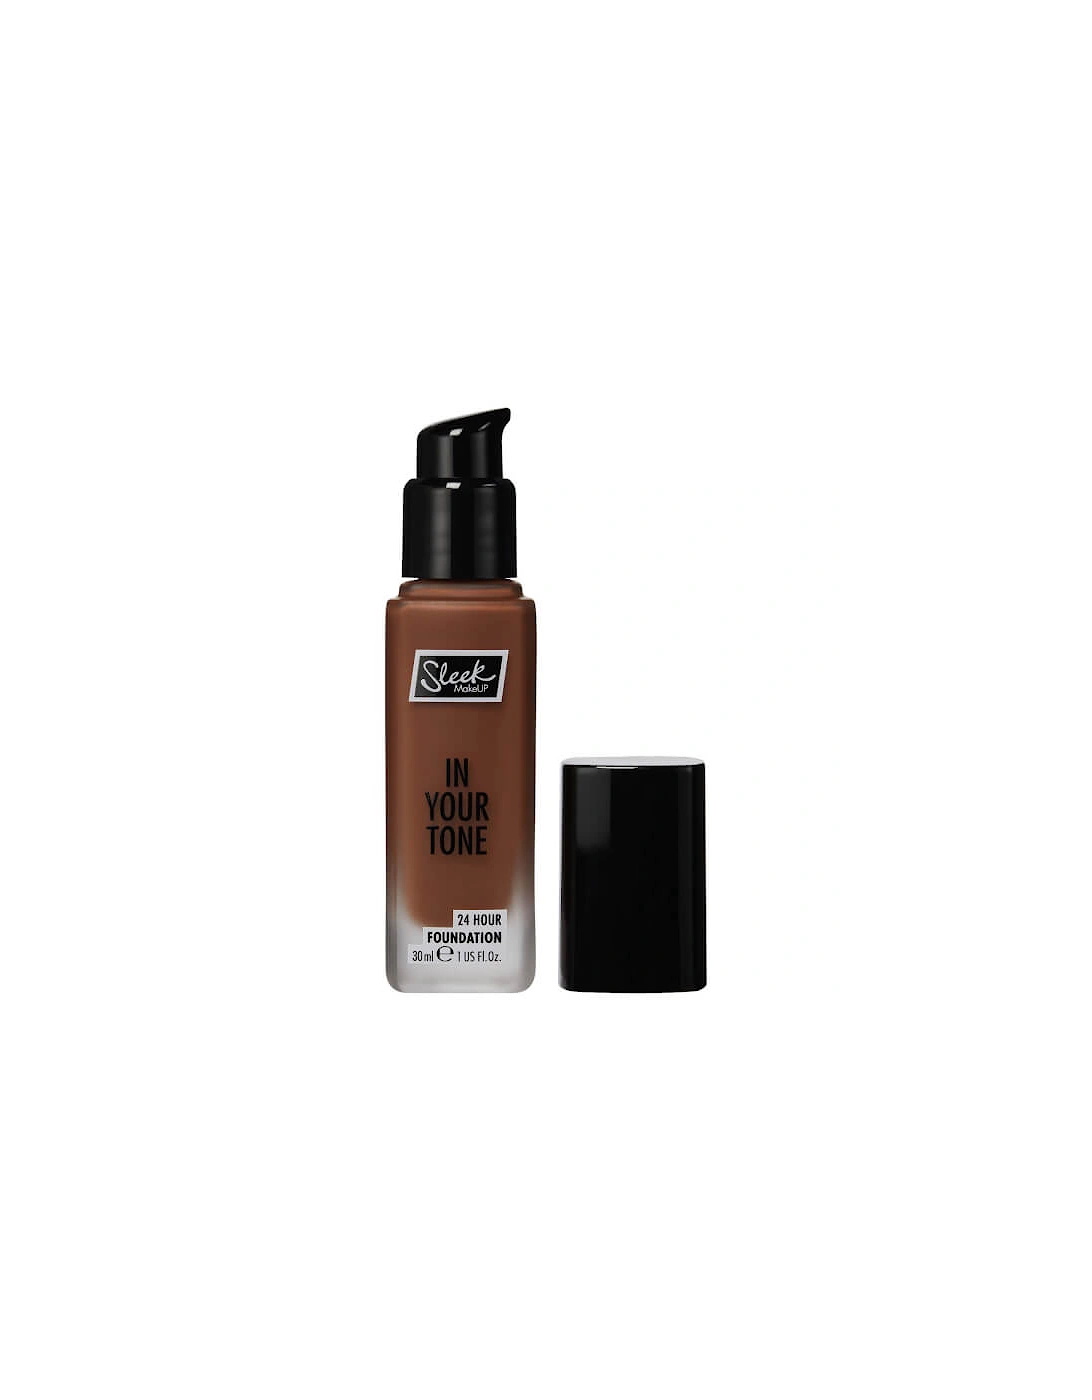 in Your Tone 24 Hour Foundation - 12N, 2 of 1